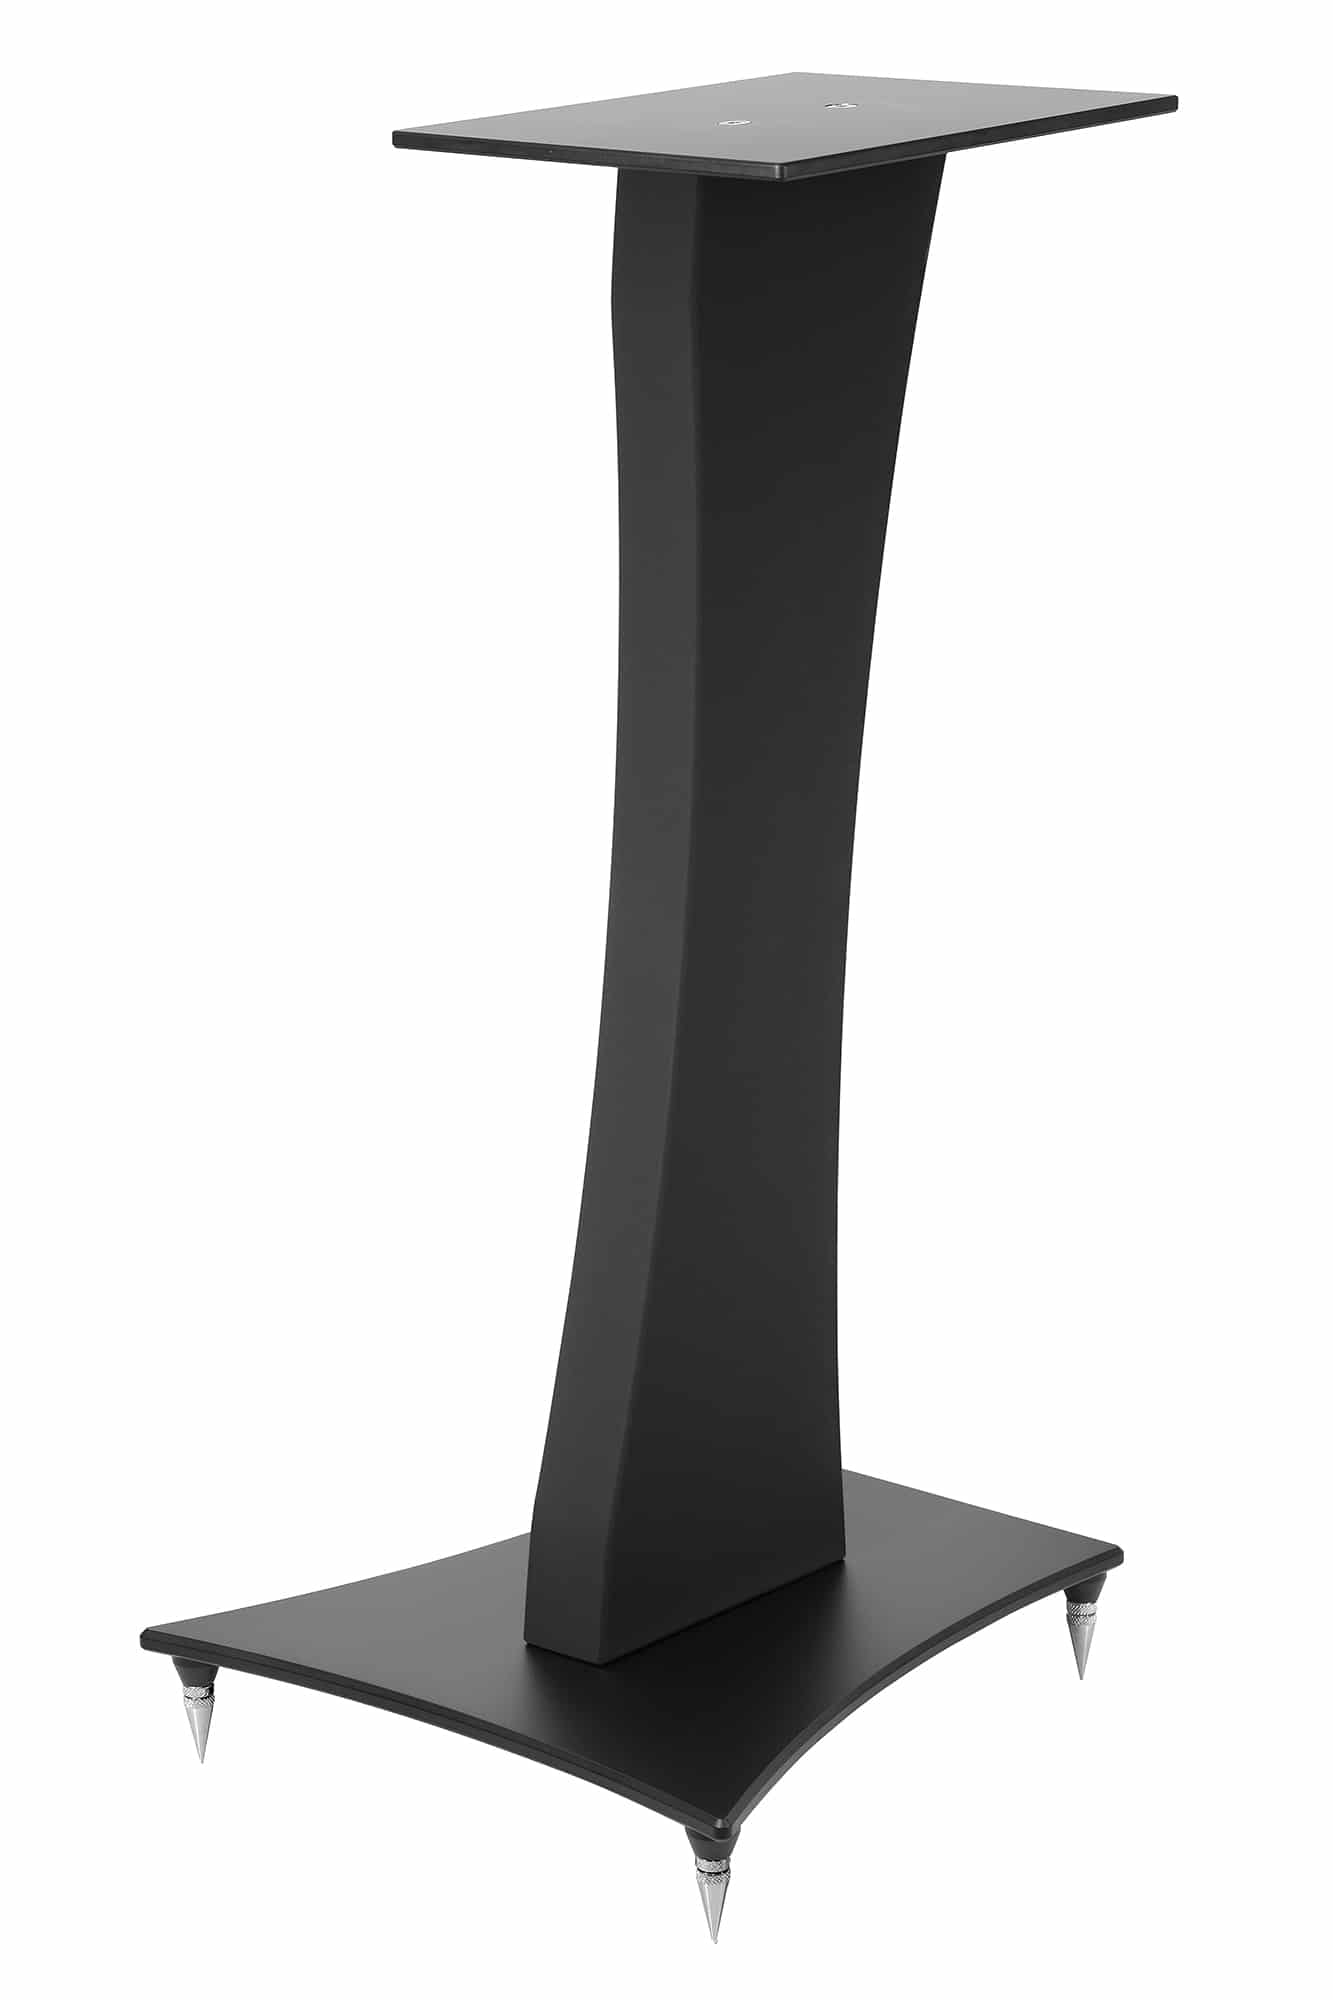 X-Reference HiFi Racks Accessories - Speaker stand accessories